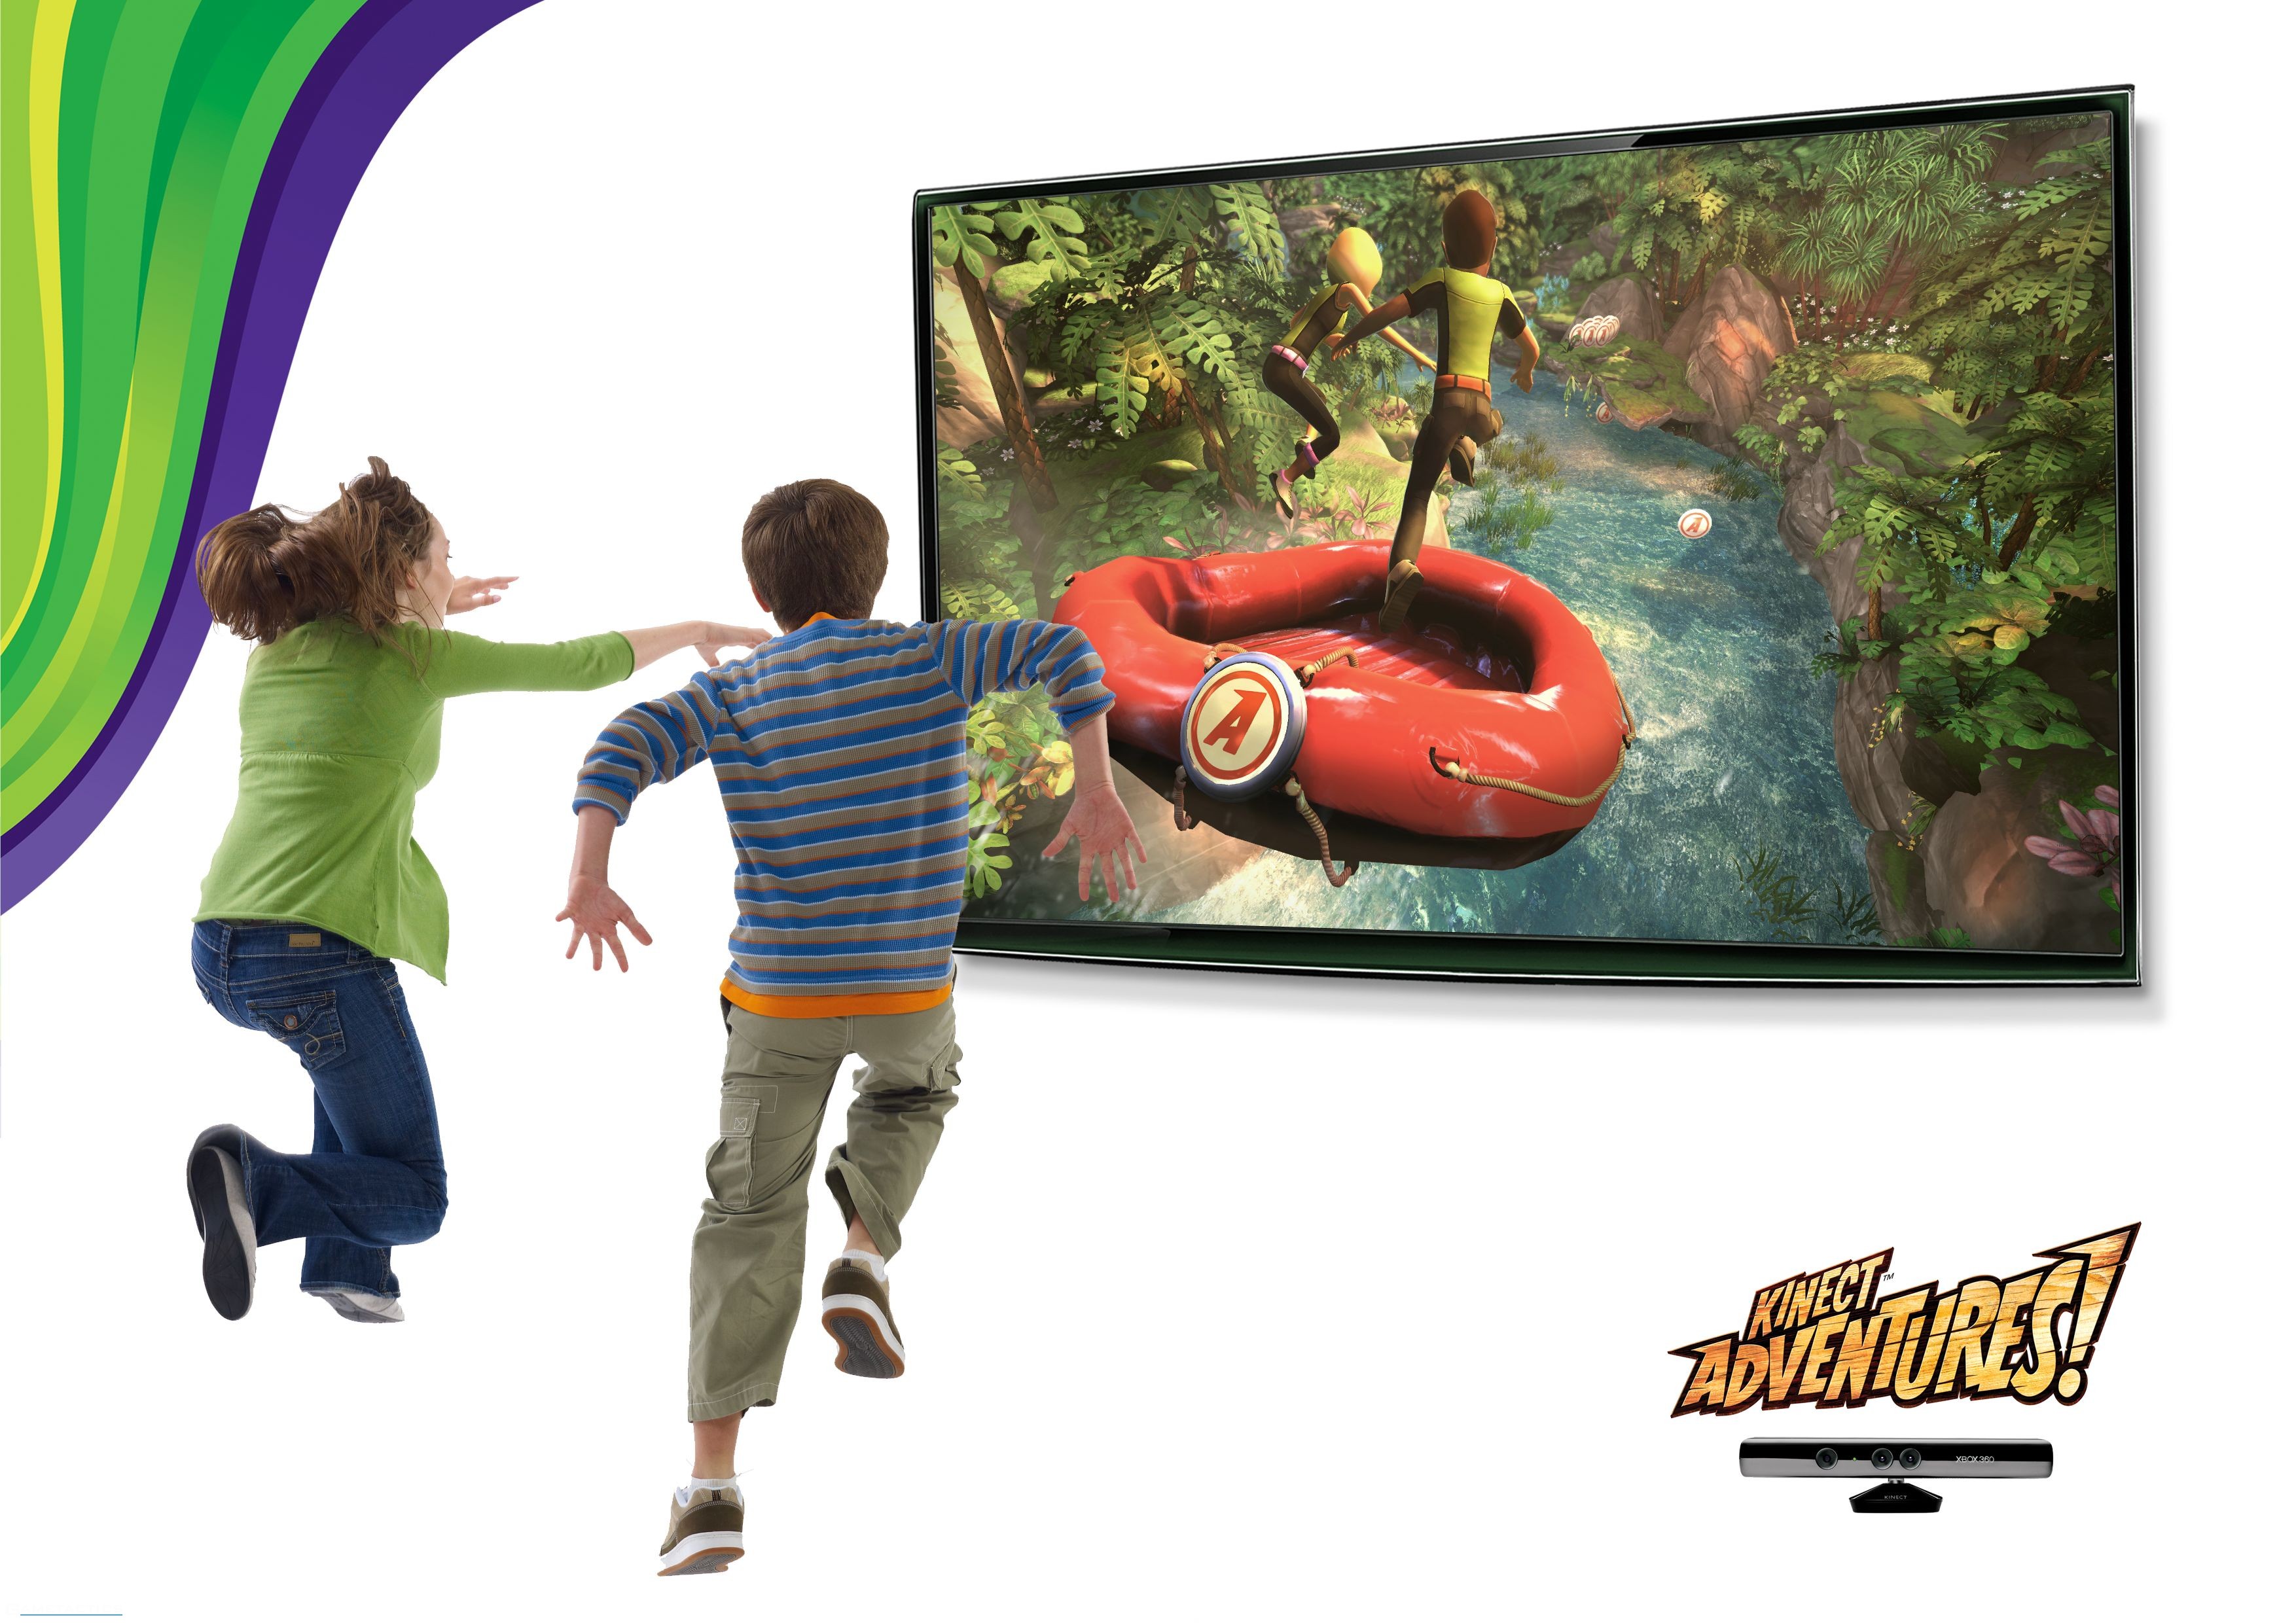 Image of two children jumping in front of a TV screen. They are playing the Kinect Adventures raft game.